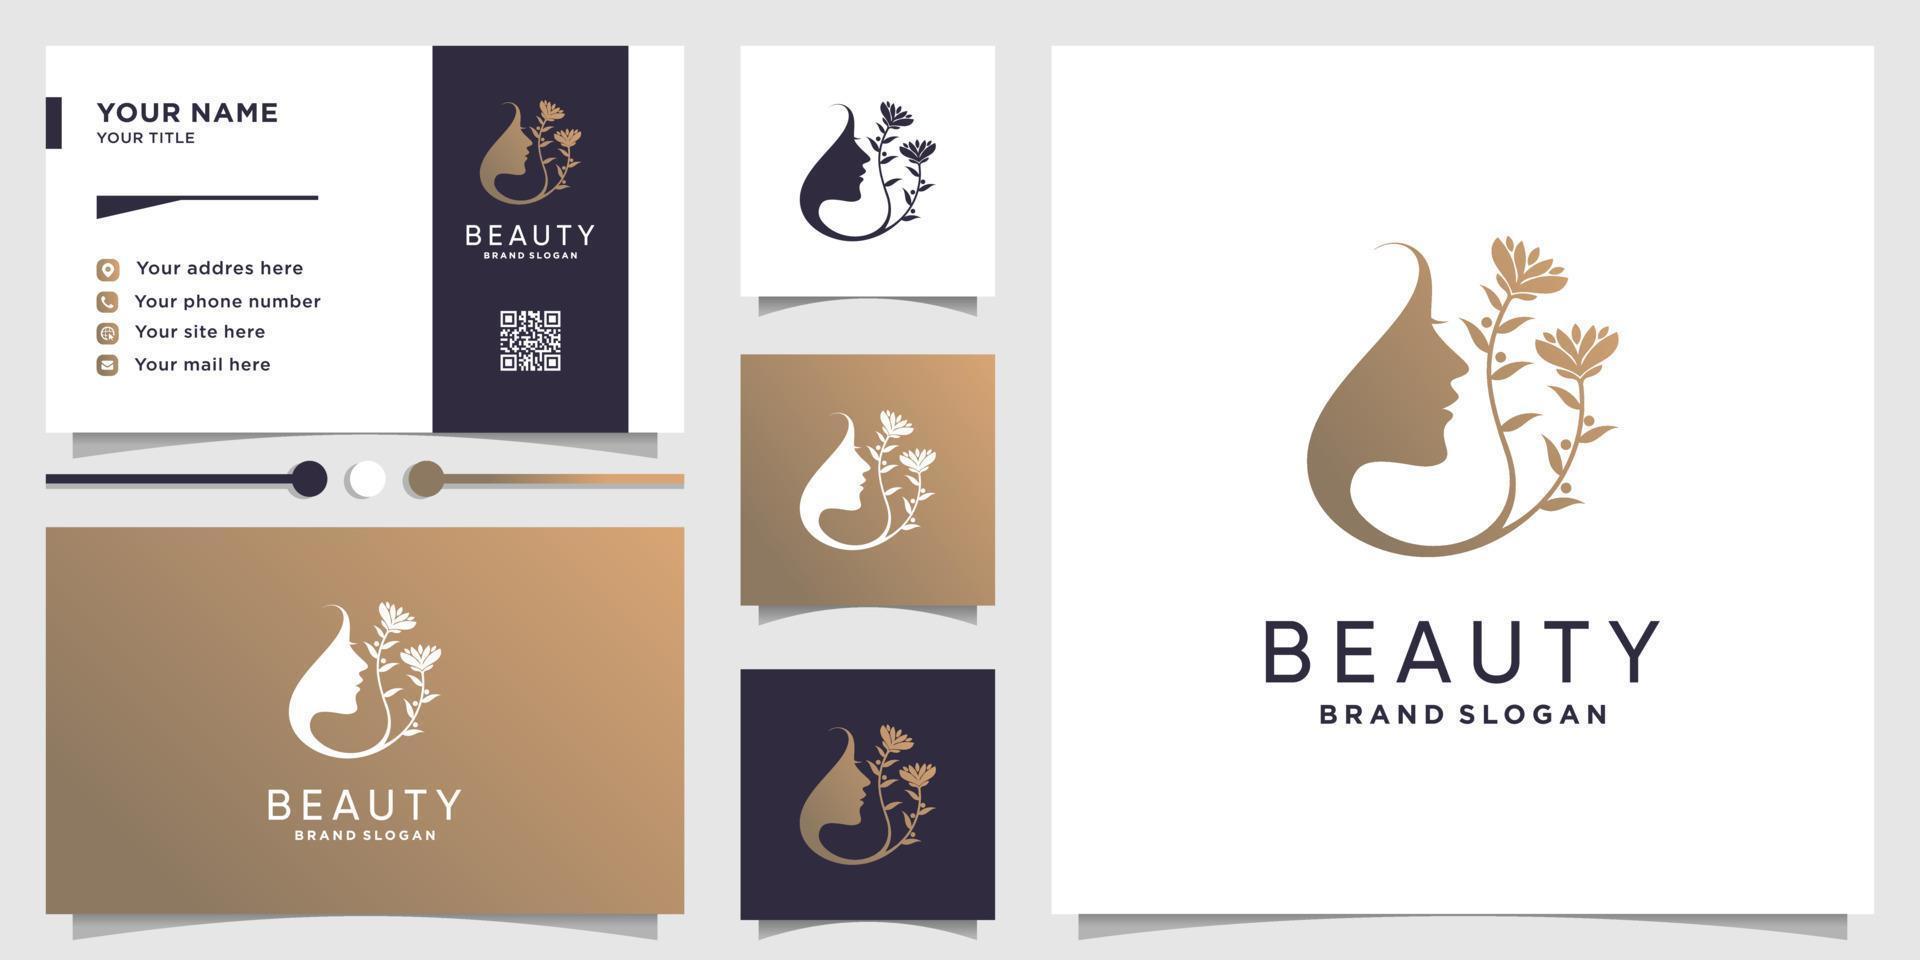 Beauty woman logo with flower concept and business card design Premium Vector